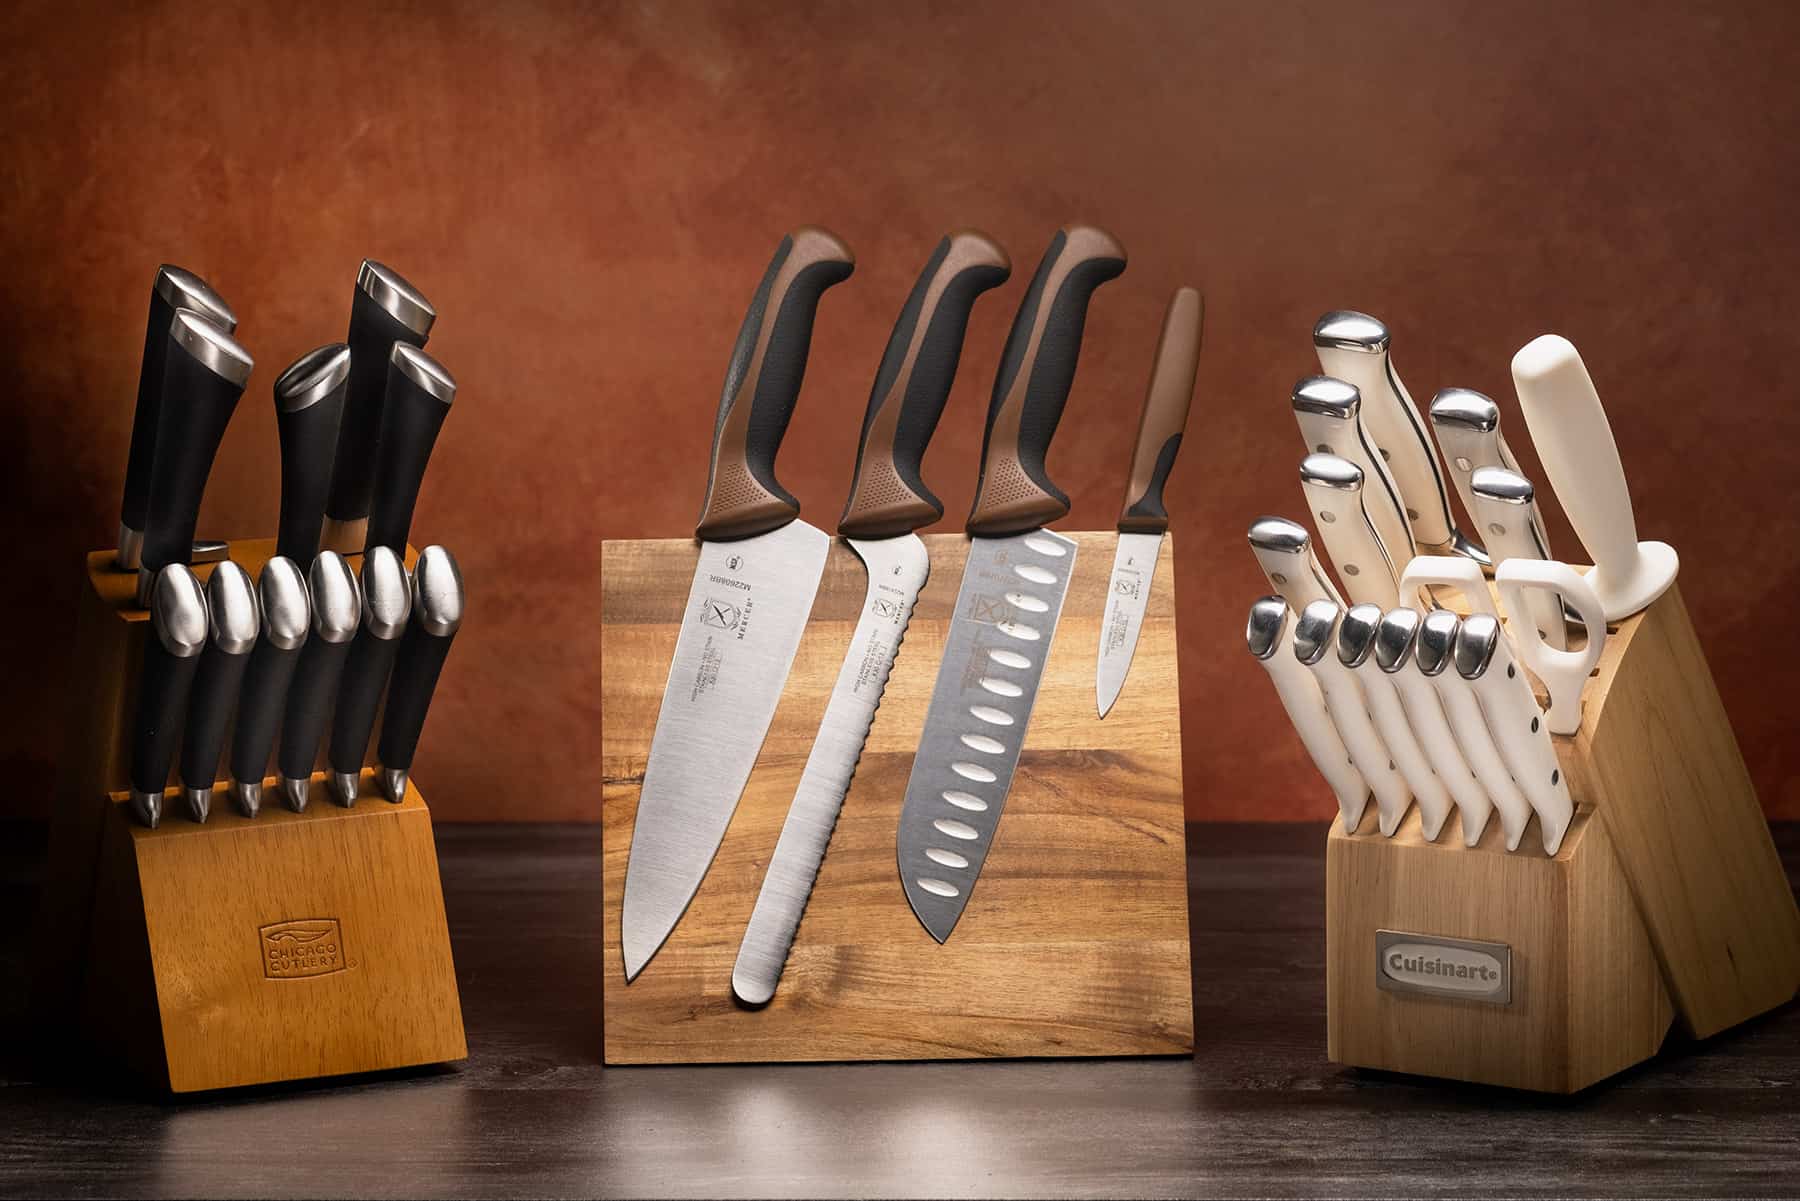 Our top picks for the best kitchen knife sets of 2022 from great cutlery brands.